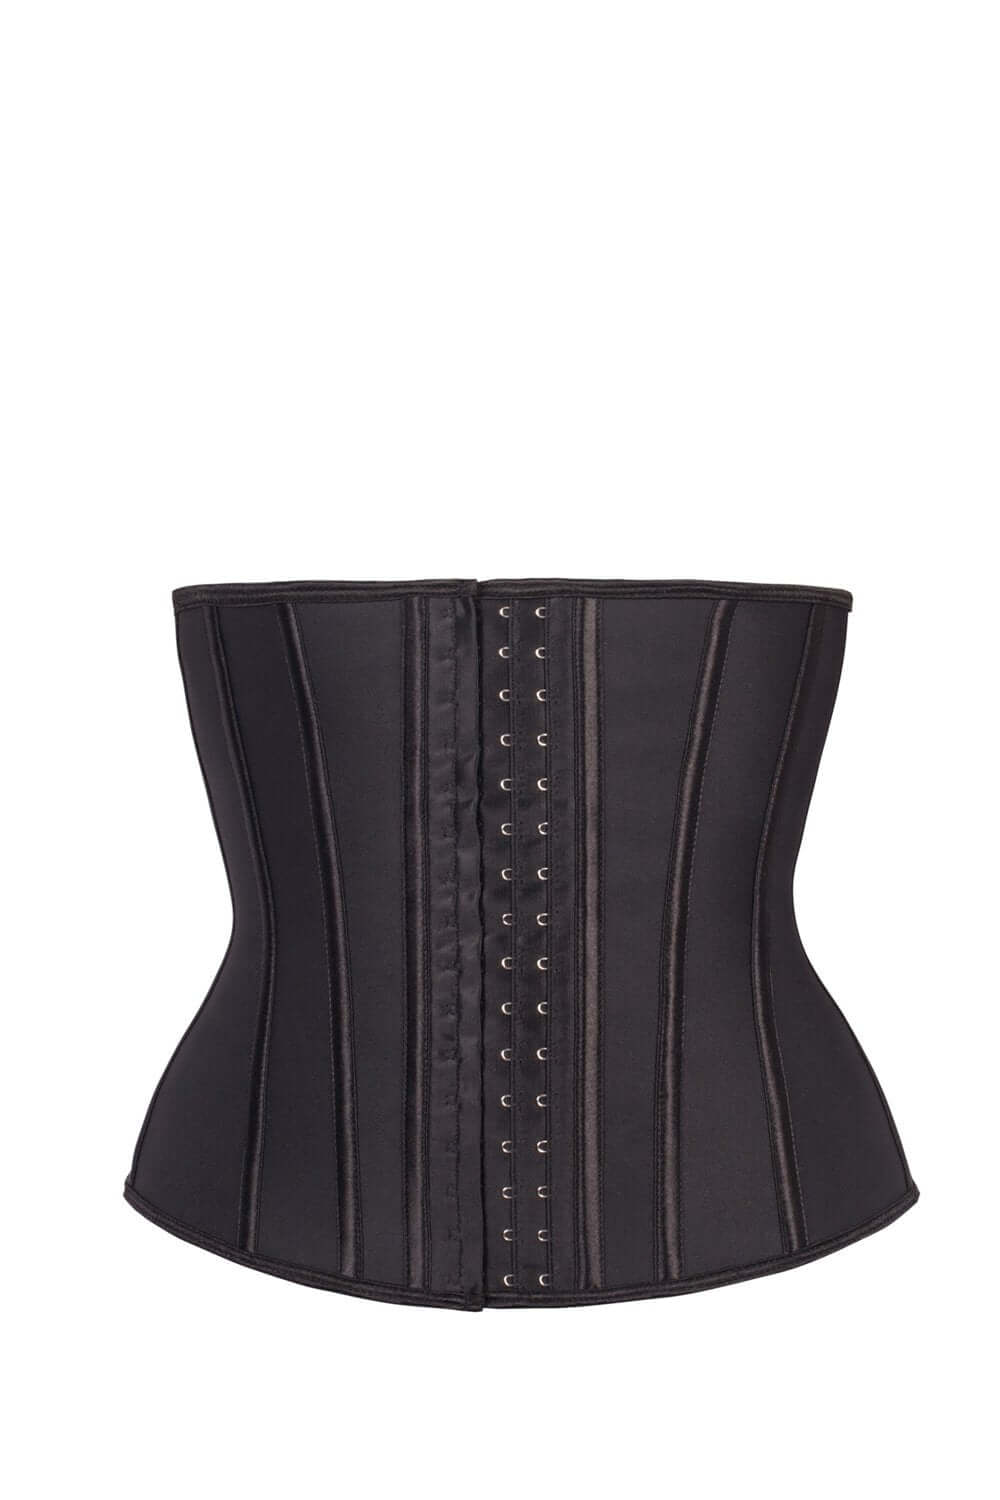 Latex Corset a Classic Under Bust Waist Cincher by Vex Clothing - Concave  Corset - Vex Latex